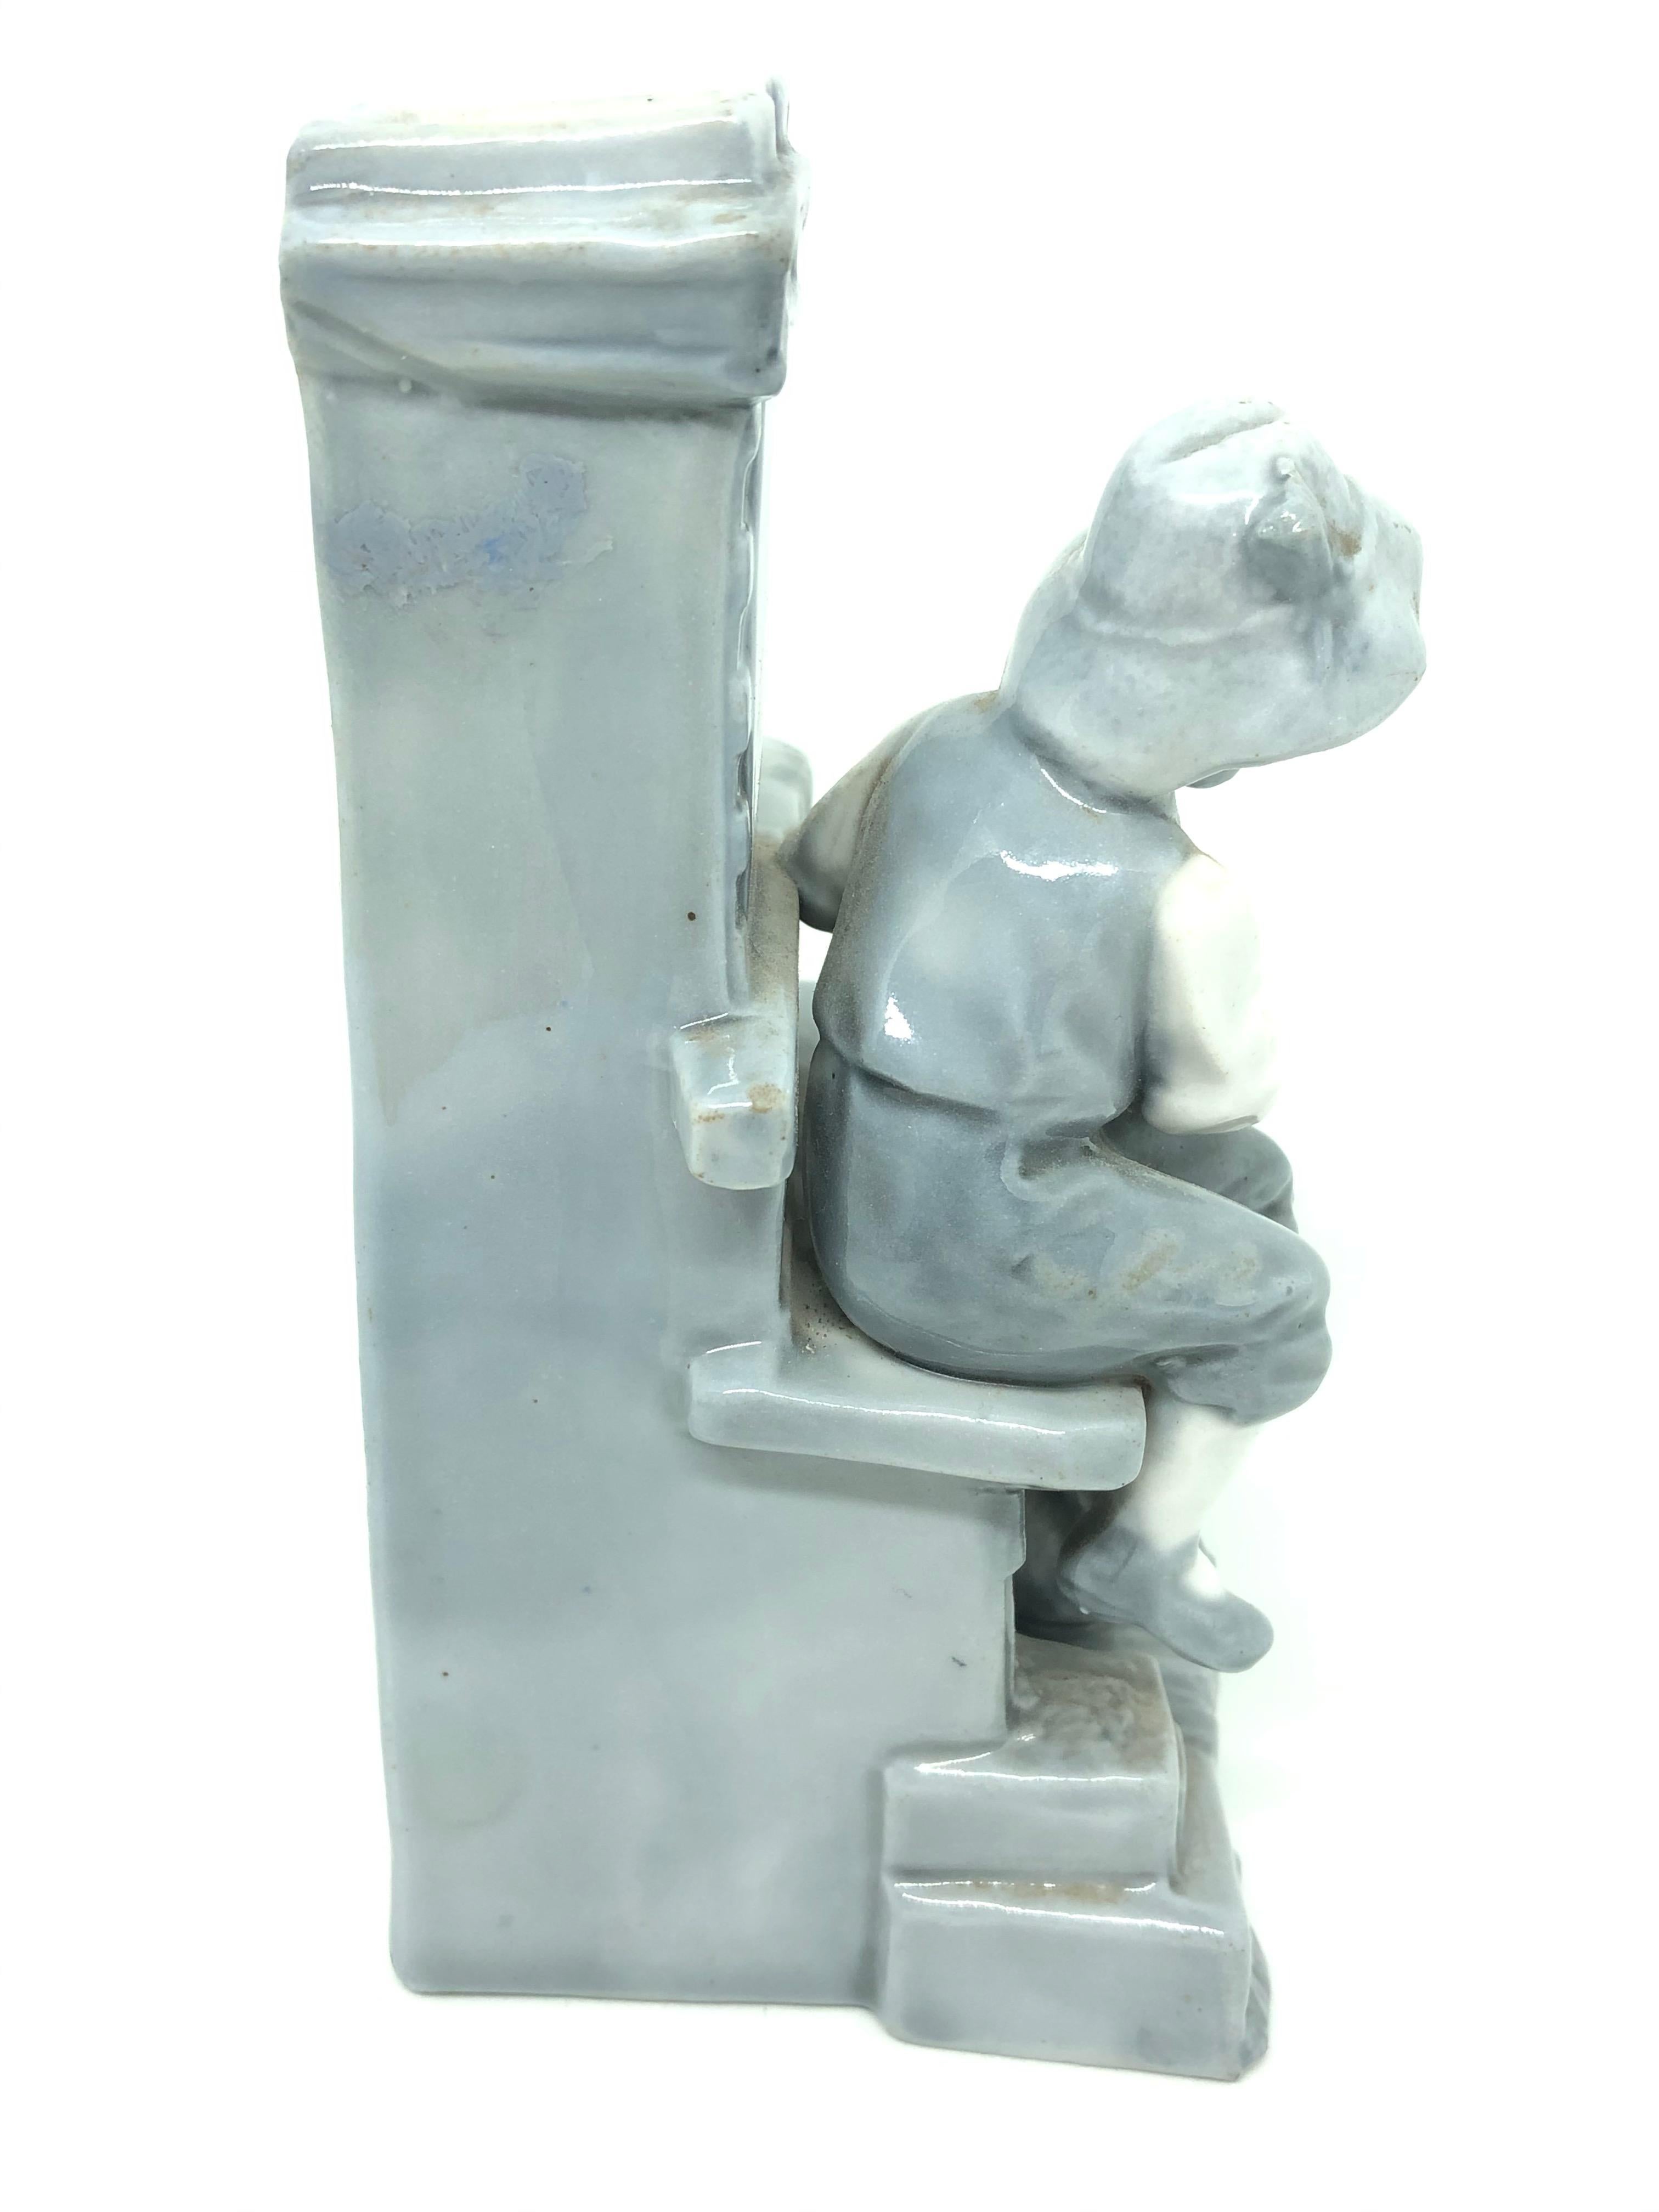 Art Nouveau Vase with Boy on Bench with Dog and Duck, circa 1900 (Deutsch)